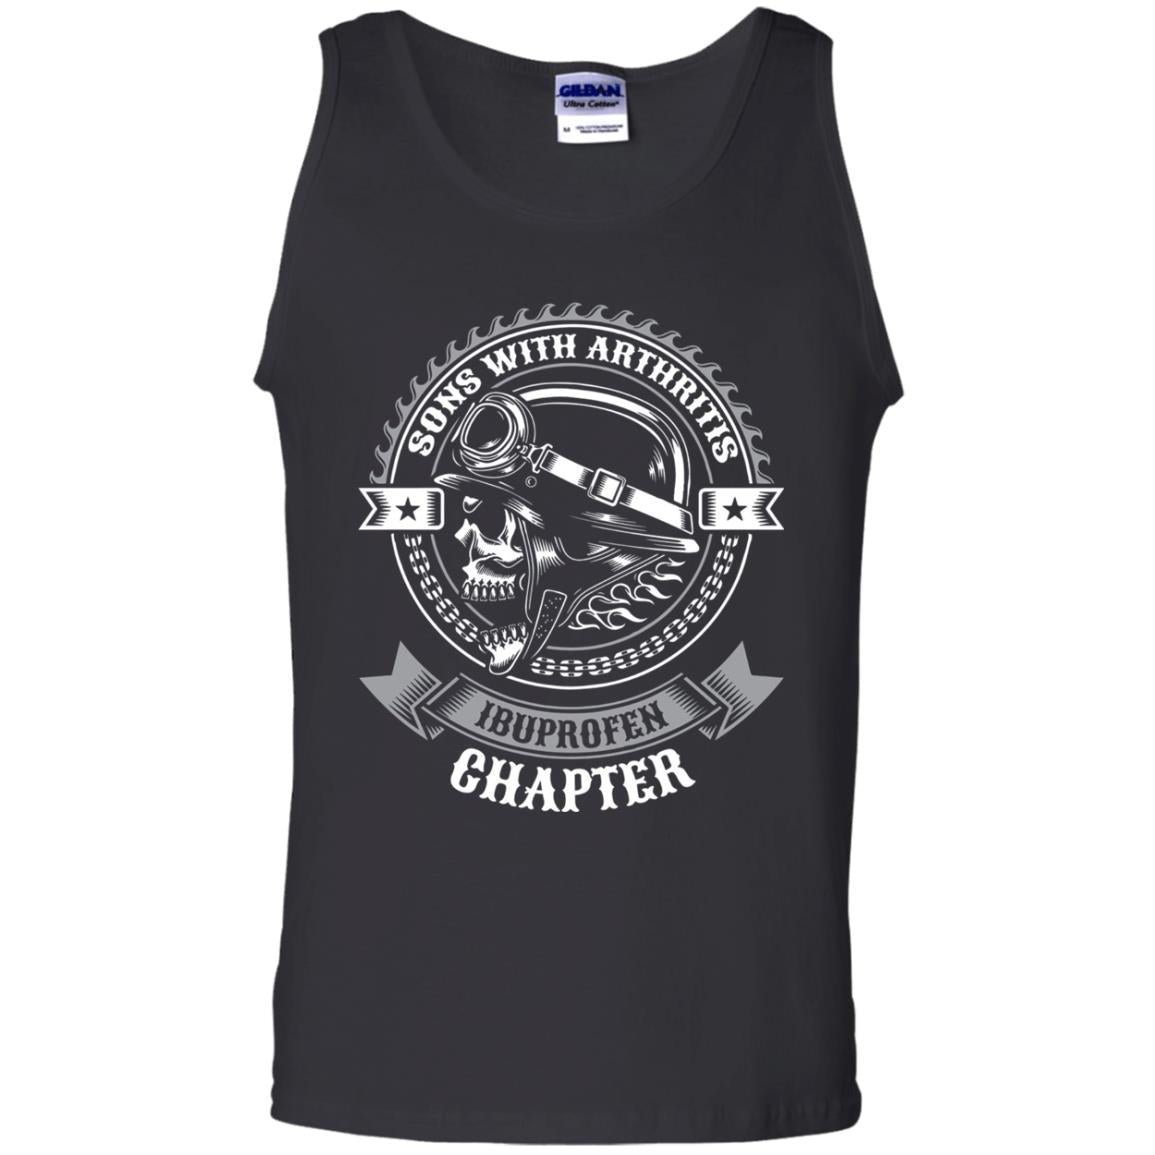 Sons With Arthritis Ibuprofen Chapter Funny Bikers Shirt